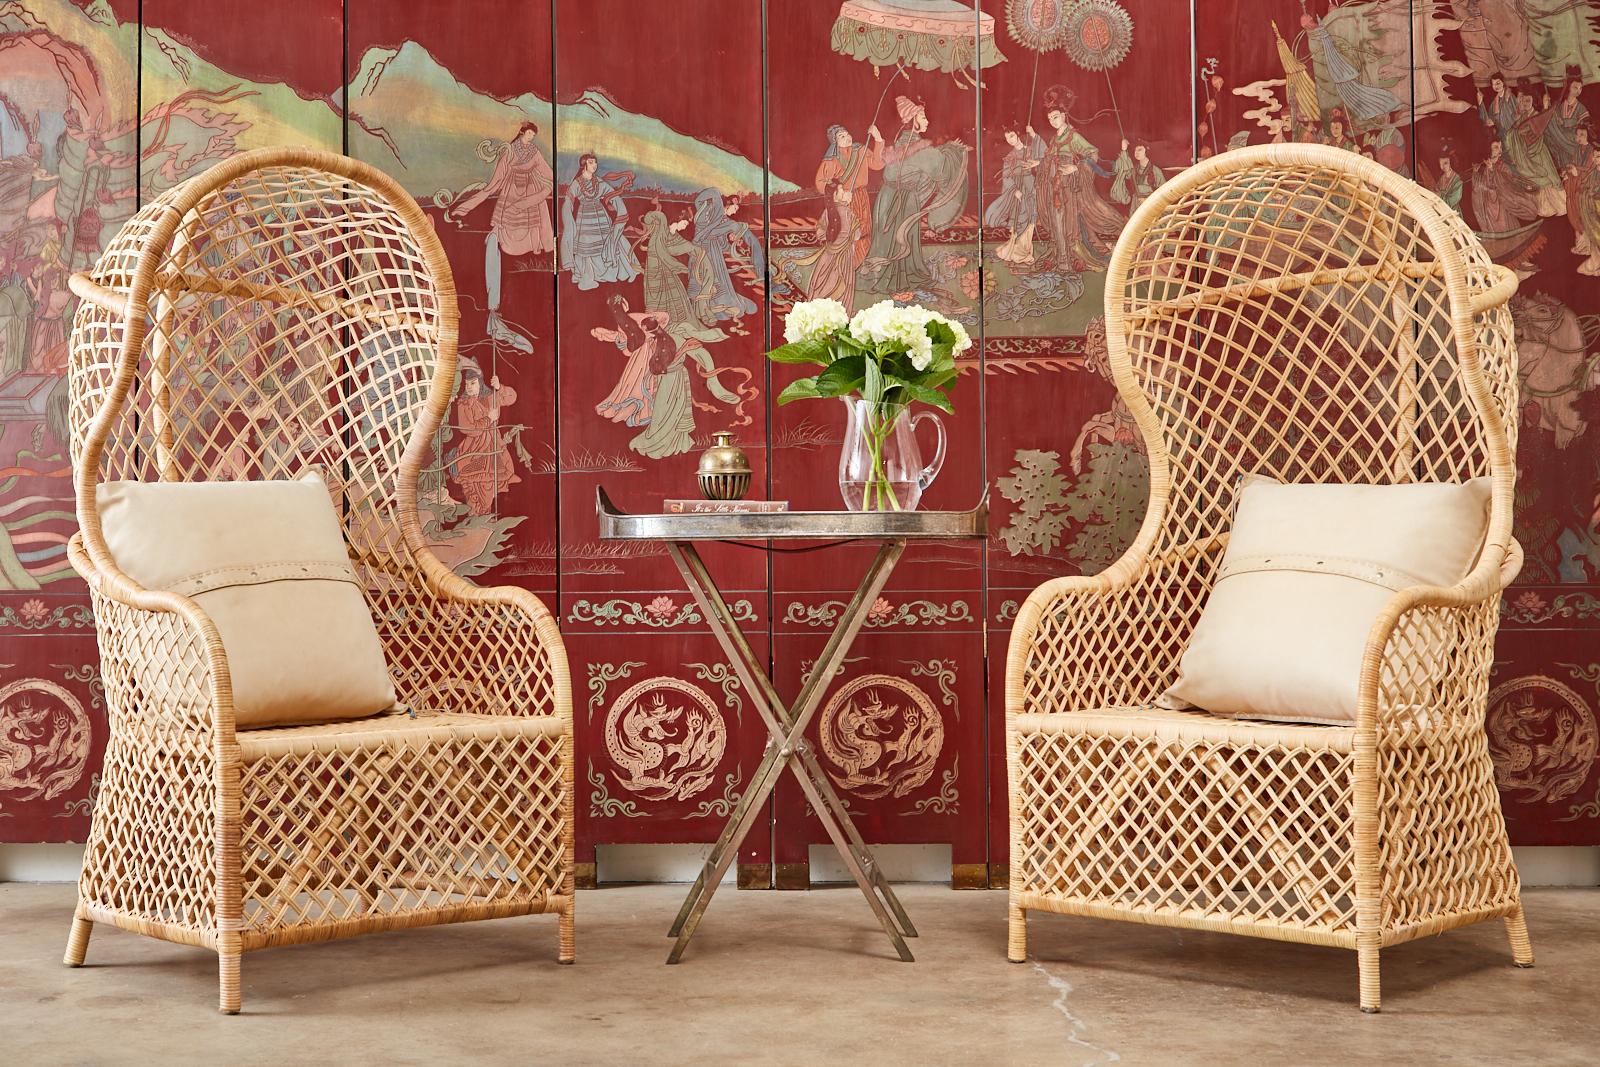 Stylish pair of hooded porters chairs or balloon chairs. Made in the organic modern style from rattan and wicker. The chairs have a birch wood frame covered in wicker or cane and fully enclosed with an open fretwork design of cross-hatch rattan.